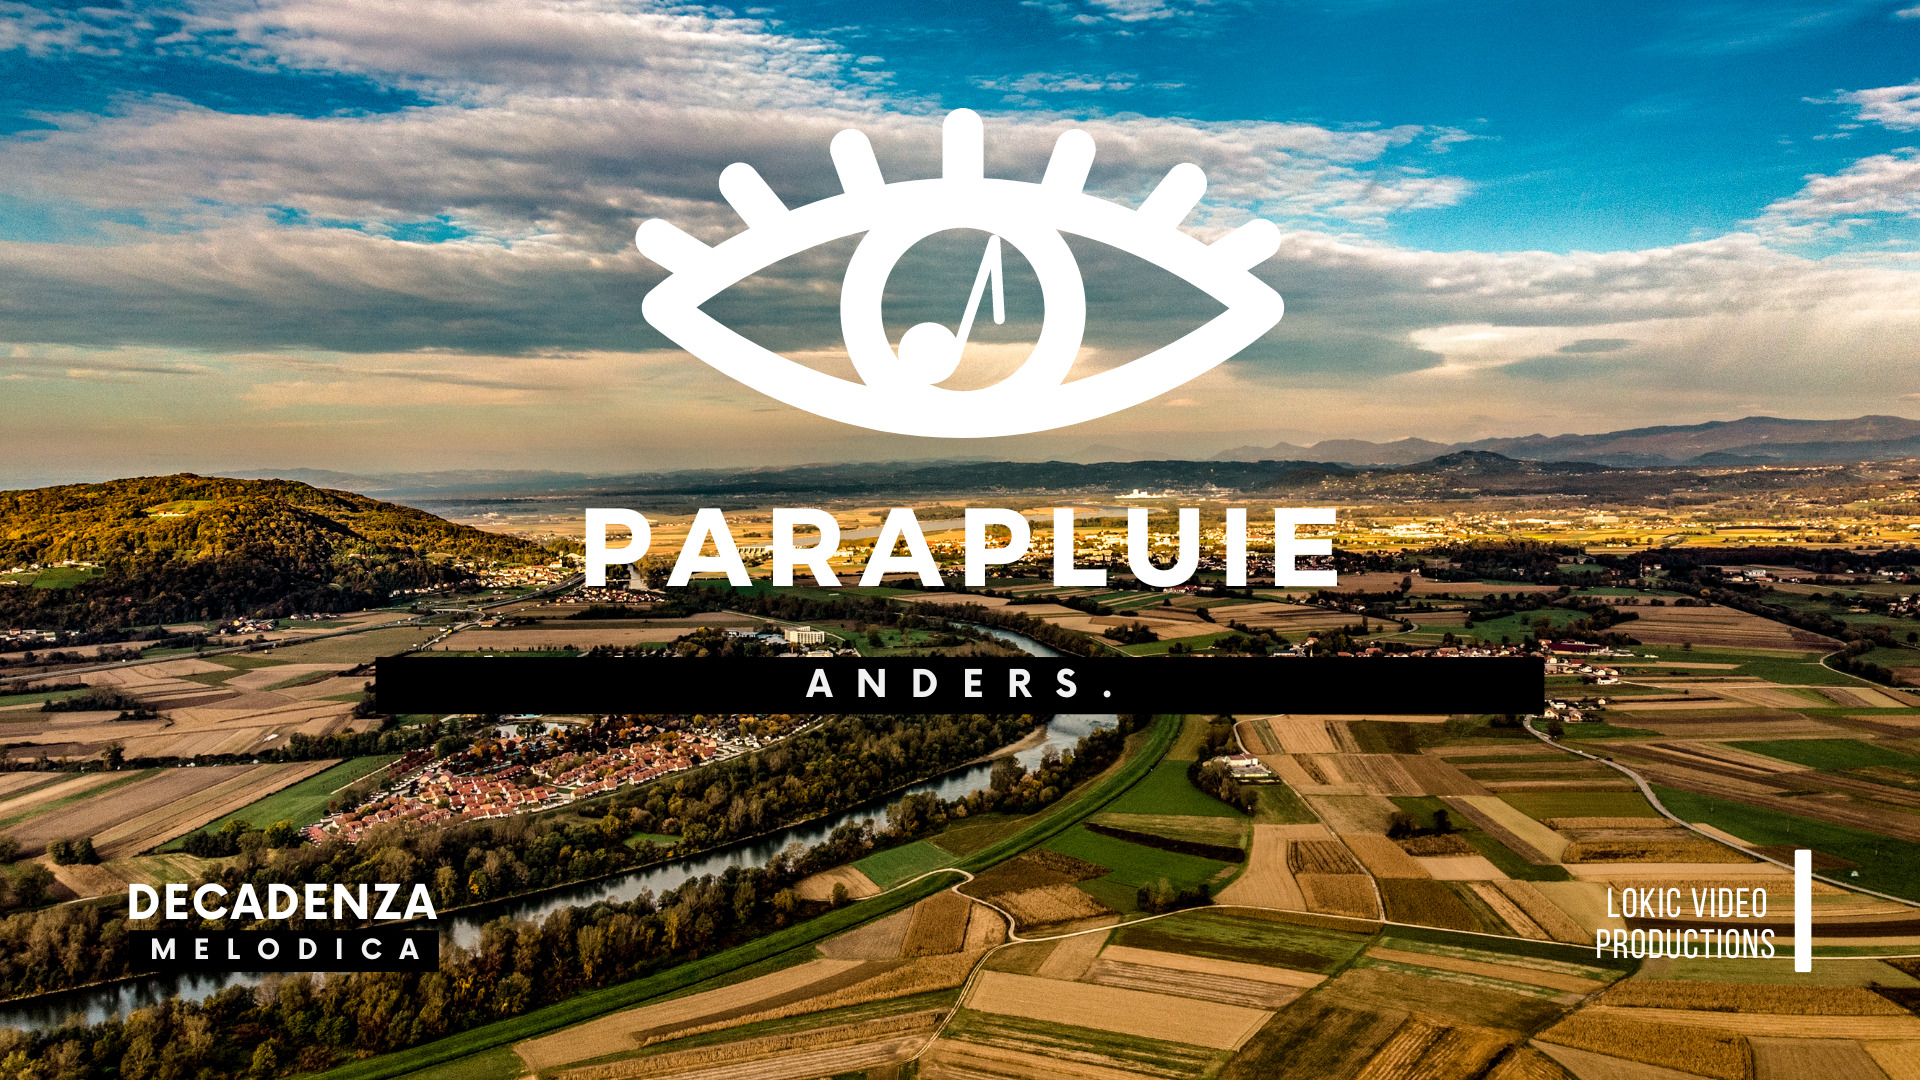 Anders. – Parapluie | Melodic Techno